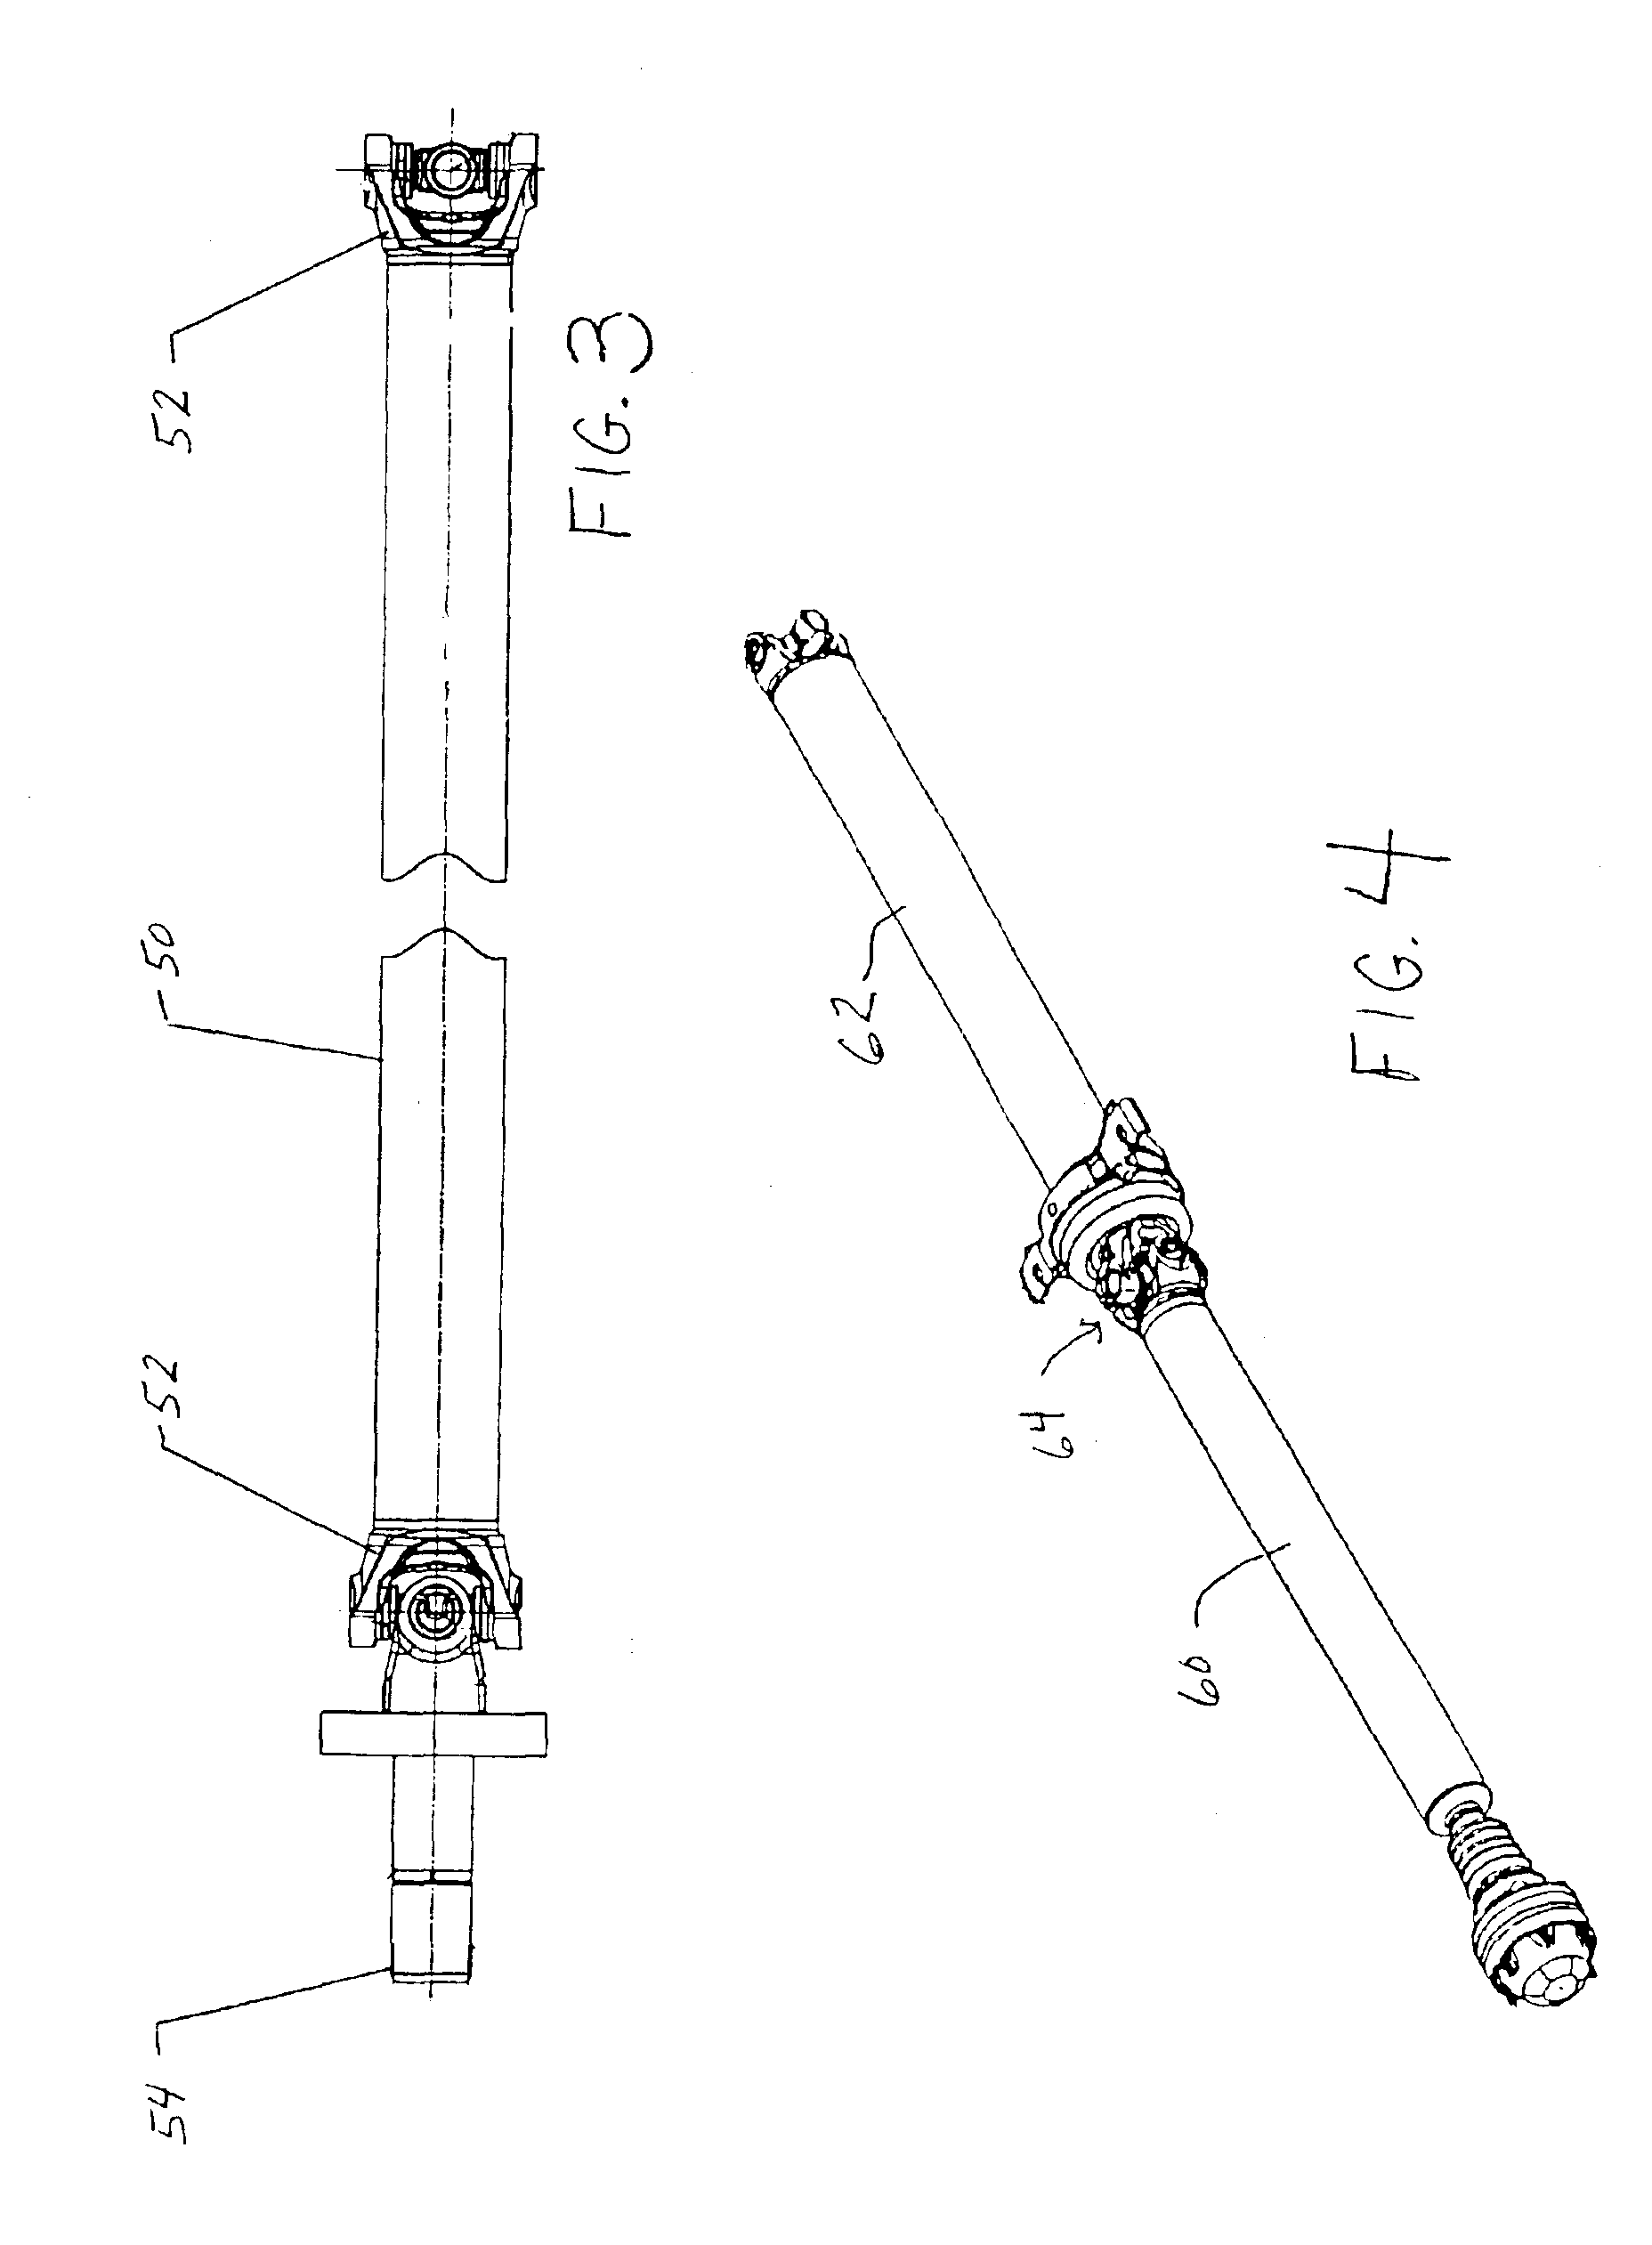 System and method for balancing a driveline system